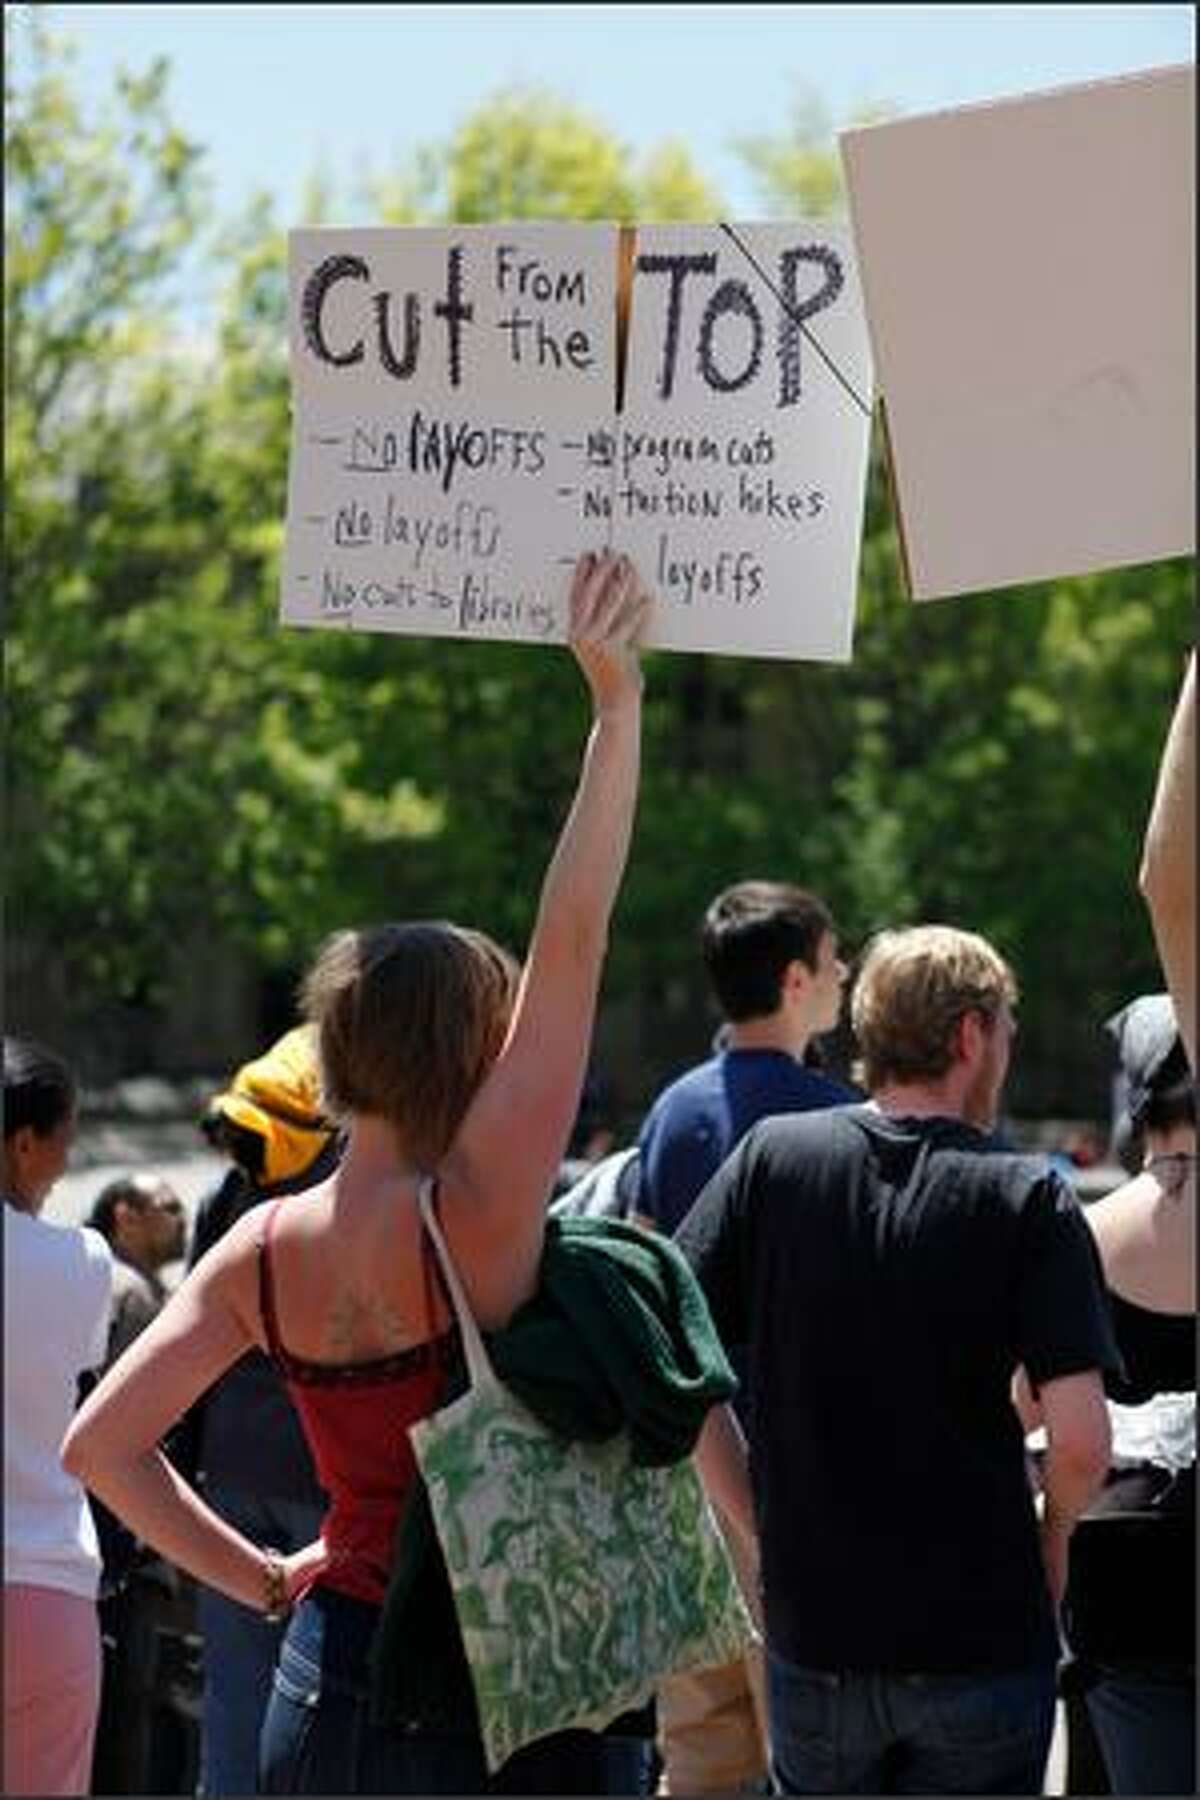 Protesters hold signs in Red Square during a rally against budget cuts and custodial swing shift eliminations at the University of Washington in Seattle, Wash. (May 28, 2009)